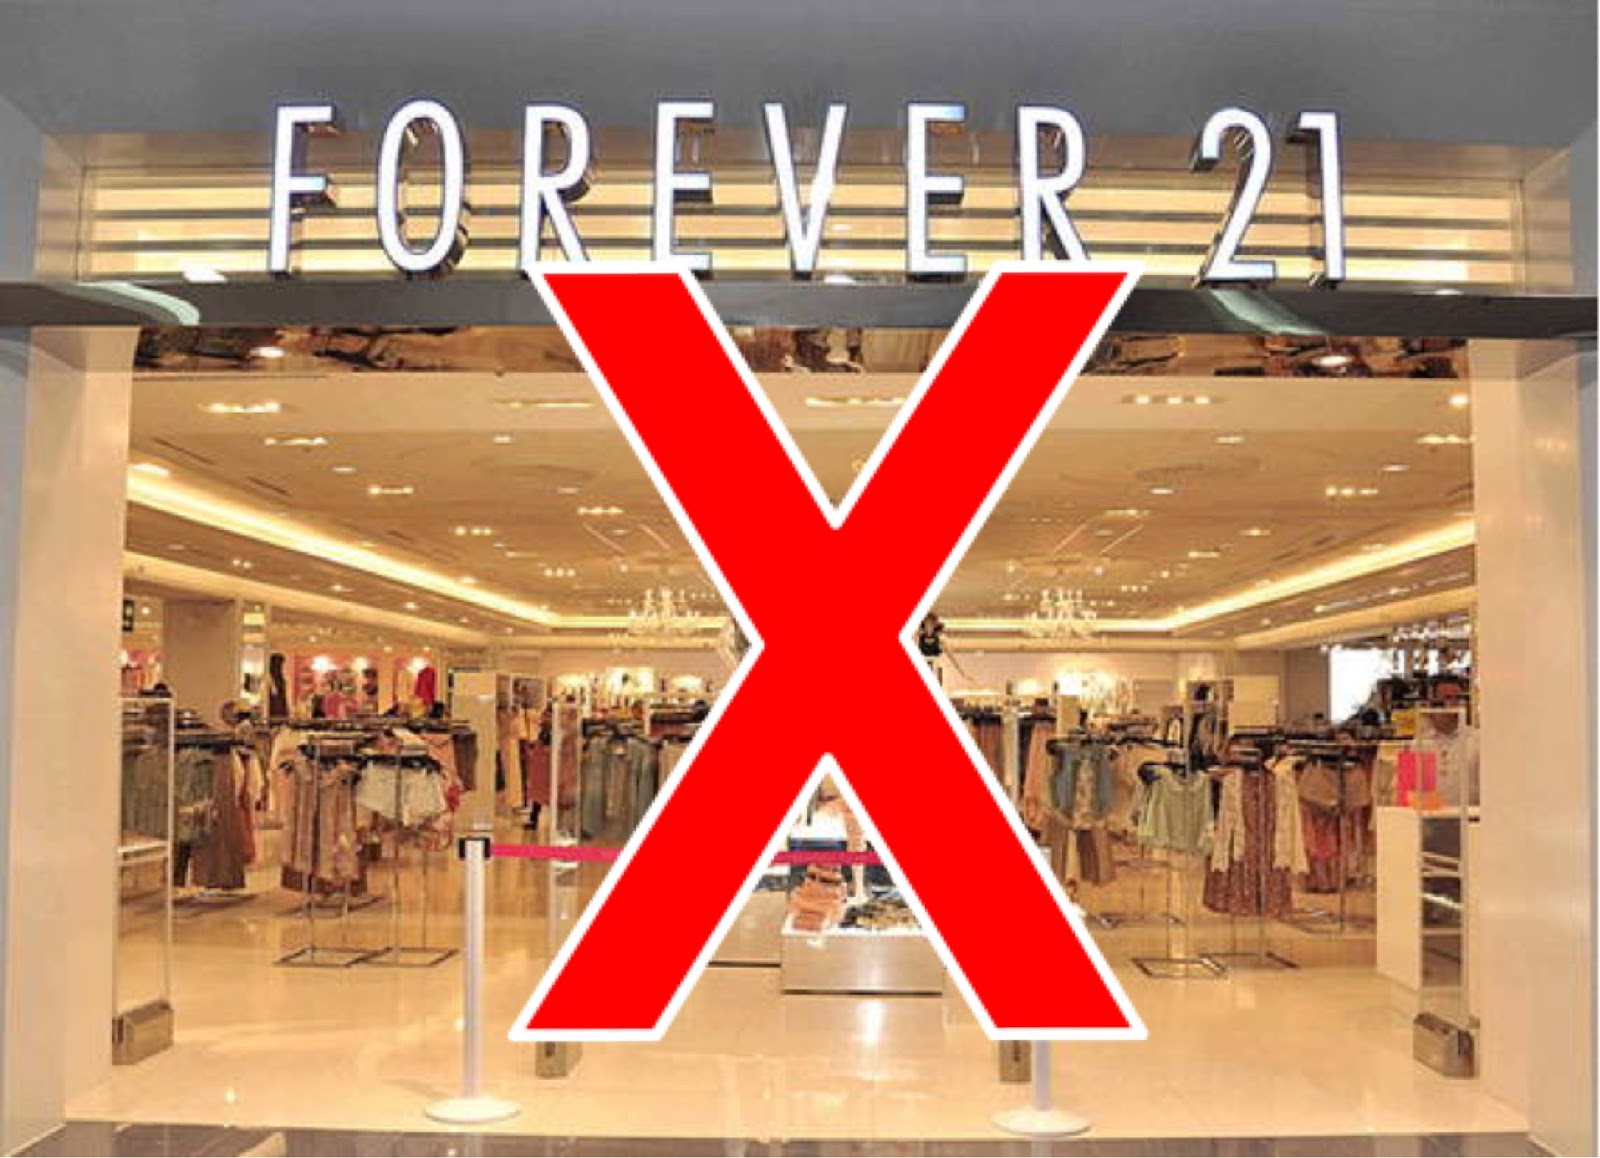 The Real Reasons You Should Avoid Shopping At Forever 21 Are Now Clear